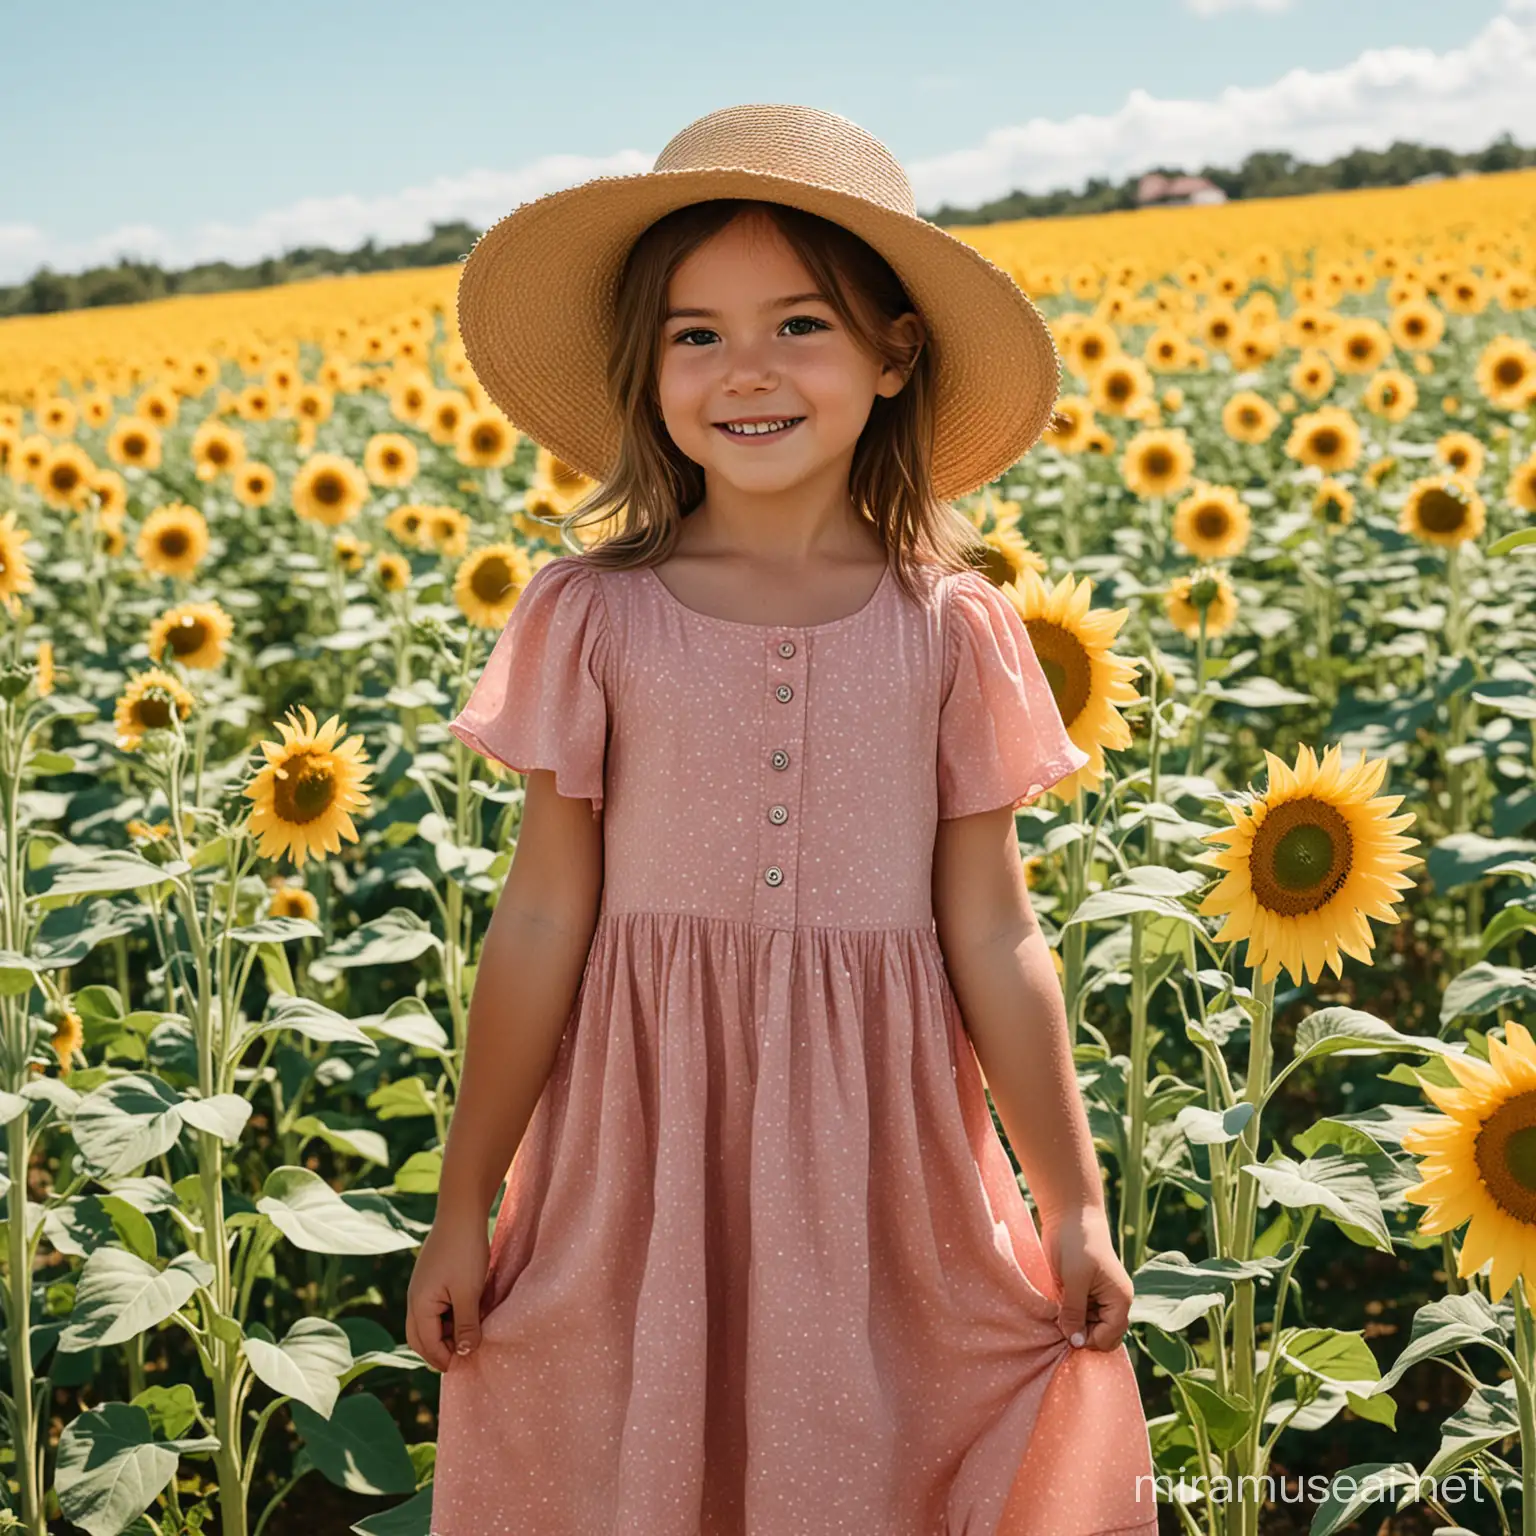 Amberjack Girl in Sunflower Field with Straw Hat and Pink Dress